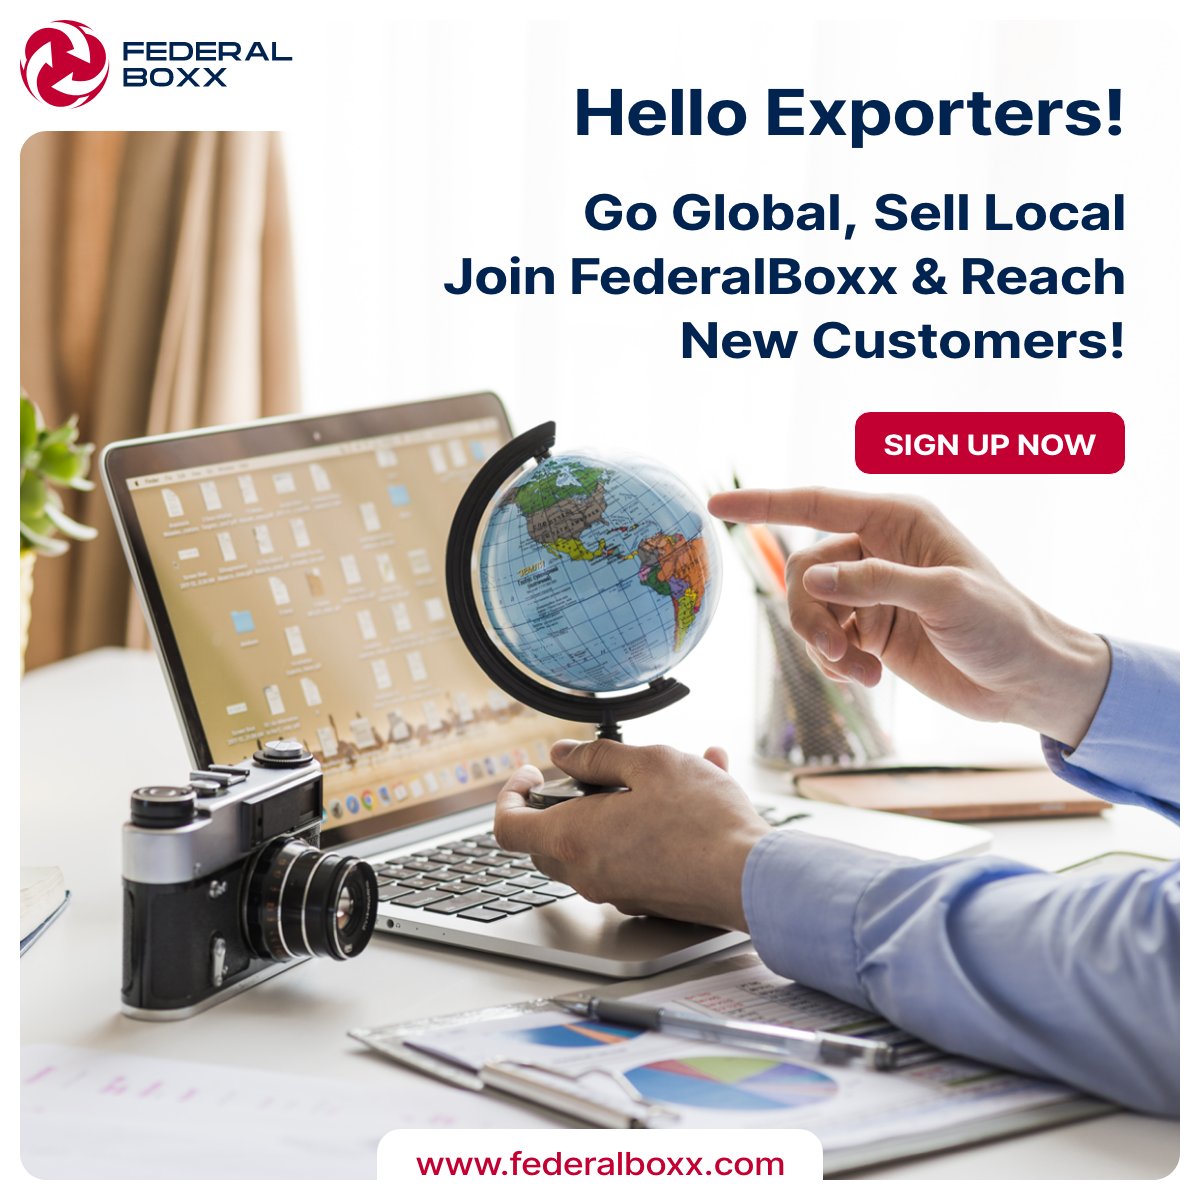 Hey Exporters!  Ready to go global and sell local? Join FederalBoxx today and reach new customers worldwide! Sign up now and expand your business horizon. #Exporters #GoGlobal #SellLocal #GlobalMarket #BusinessExpansion